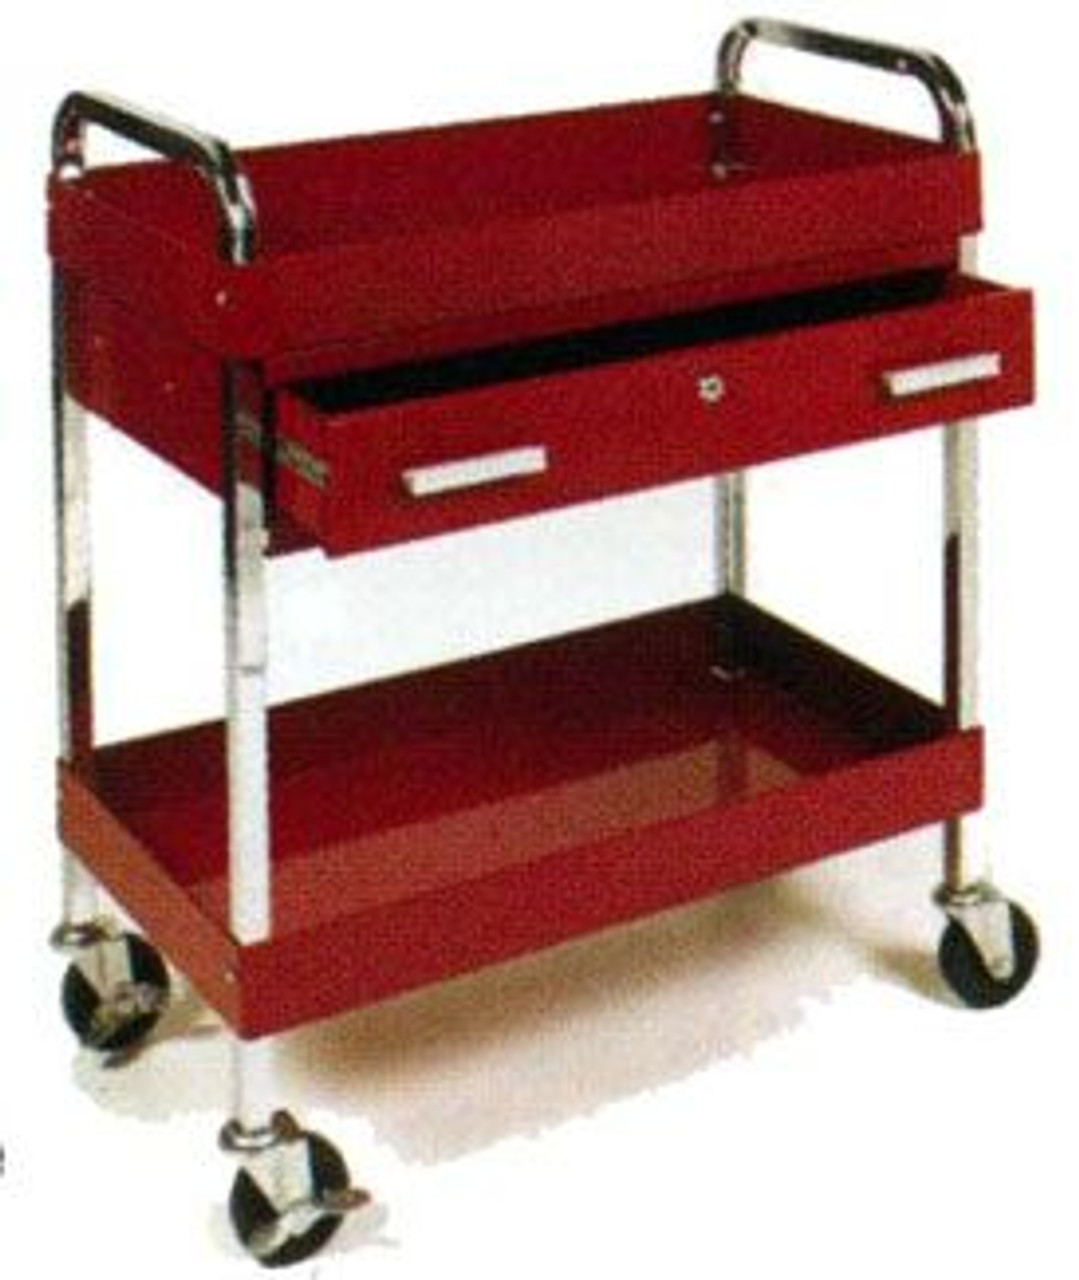 Performance Tool W54004 Two Shelf Utility Cart with Drawer